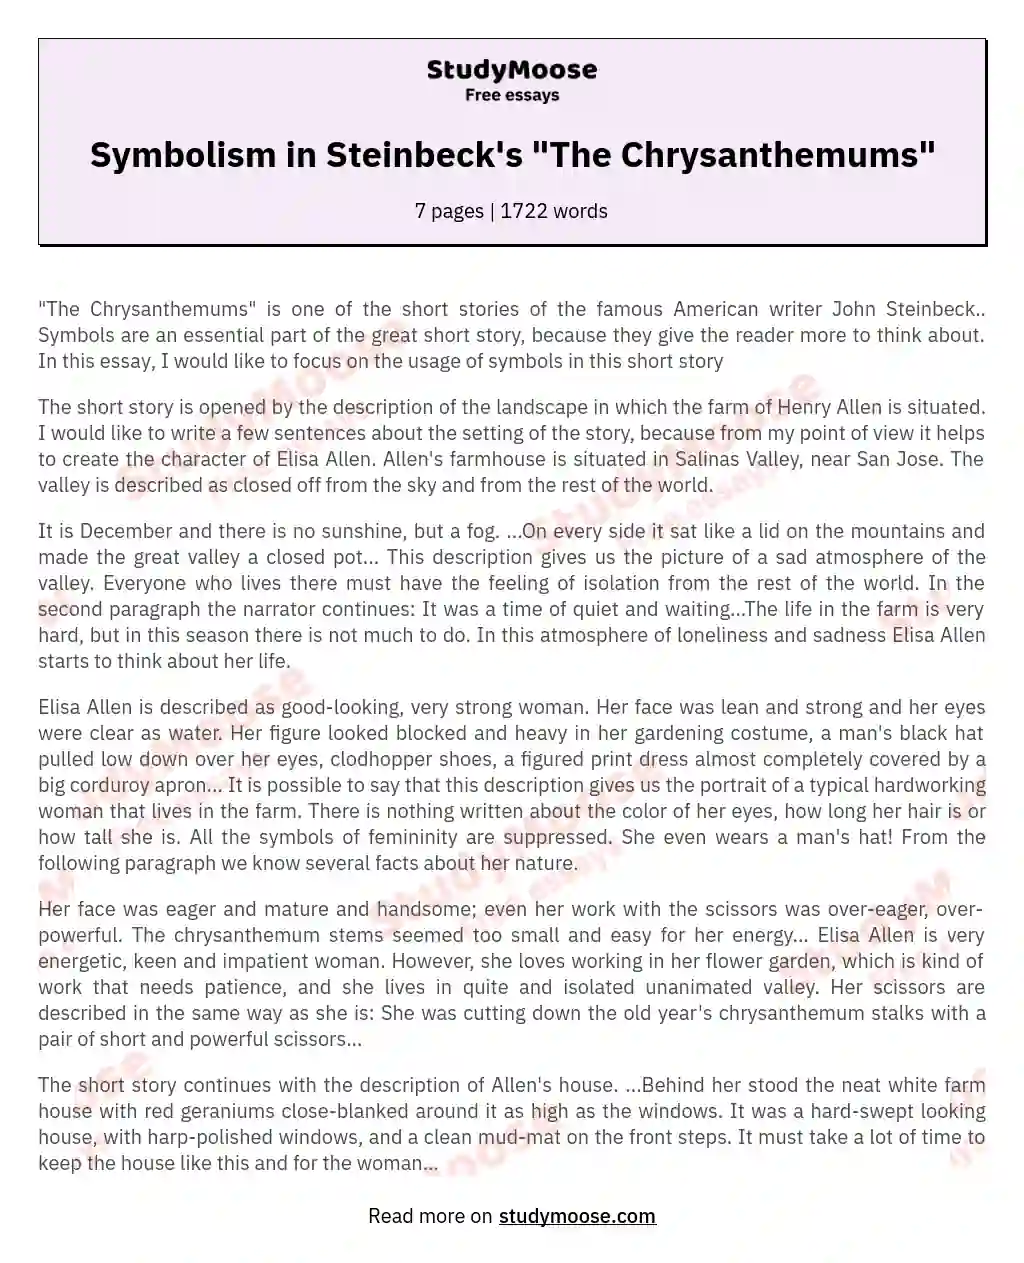 Symbolism in Steinbeck's "The Chrysanthemums"